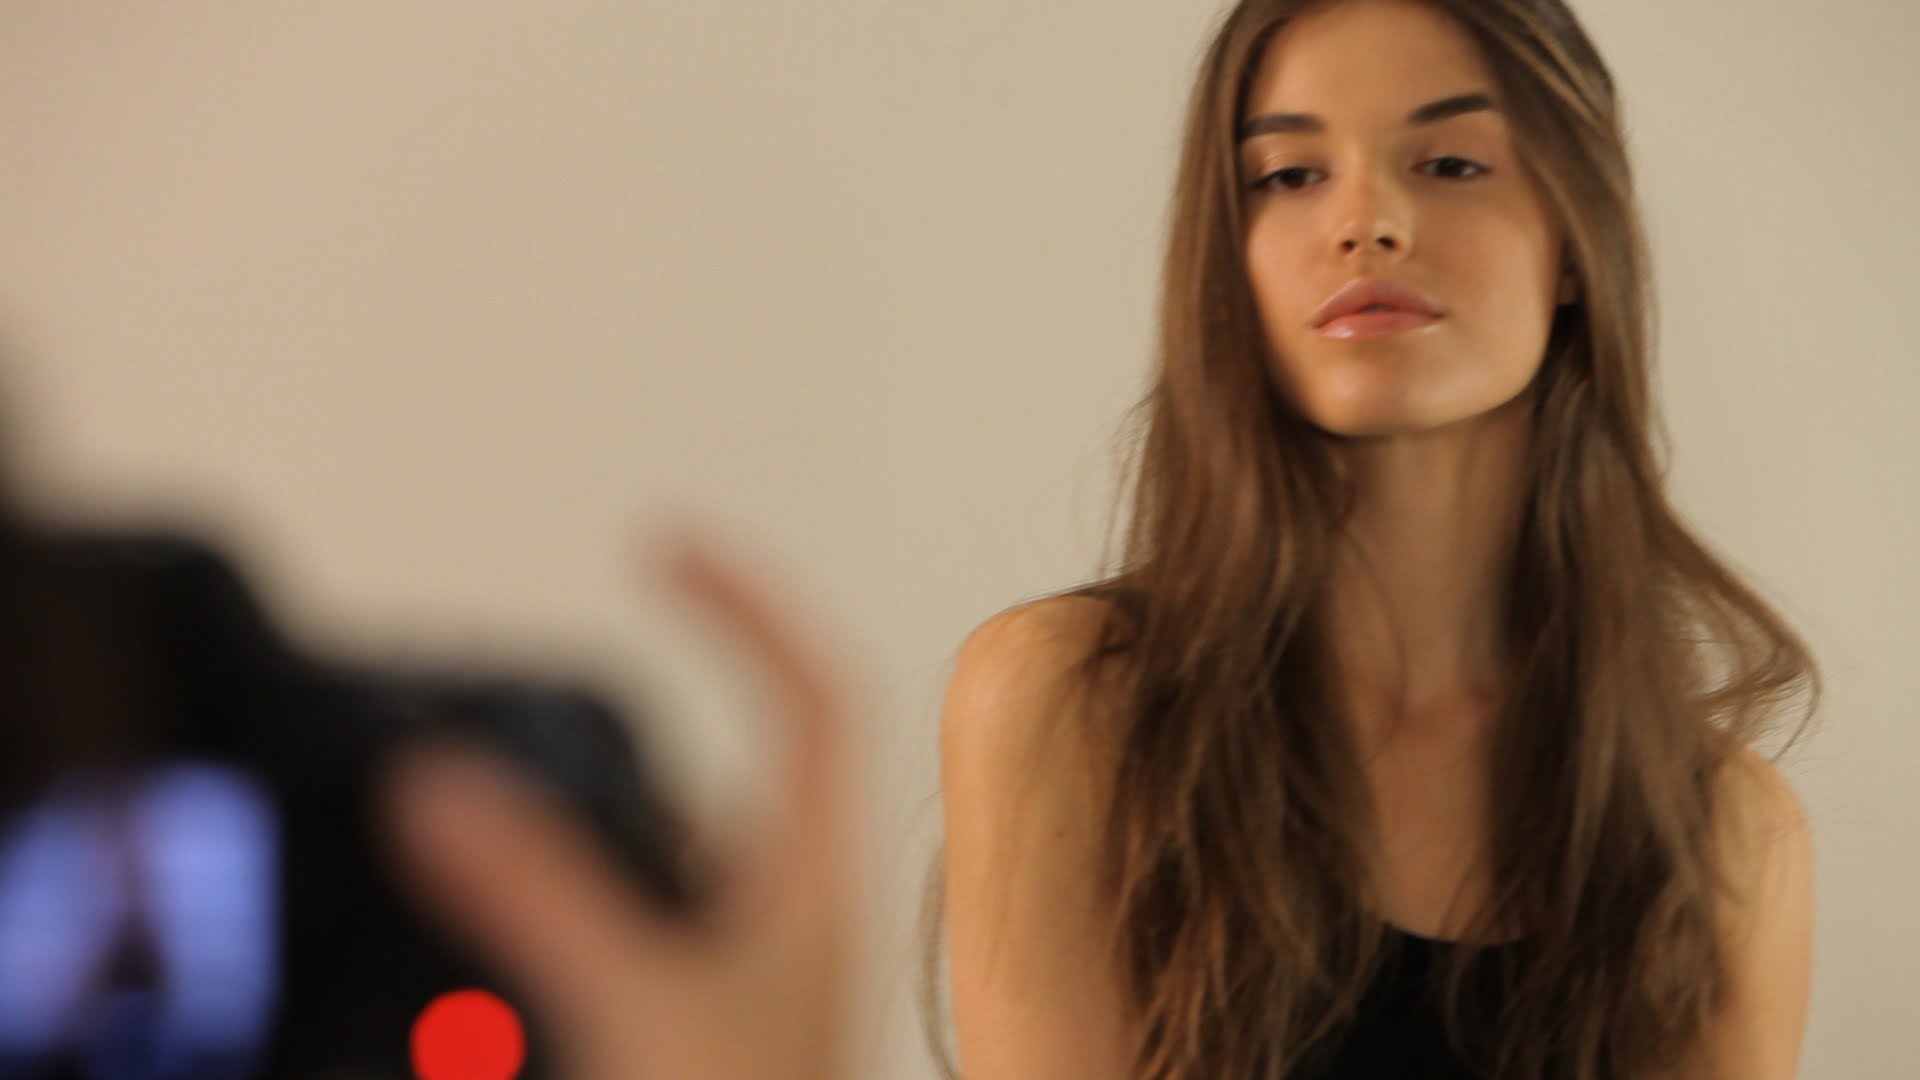 New model video. Casting Call Photoshoot.